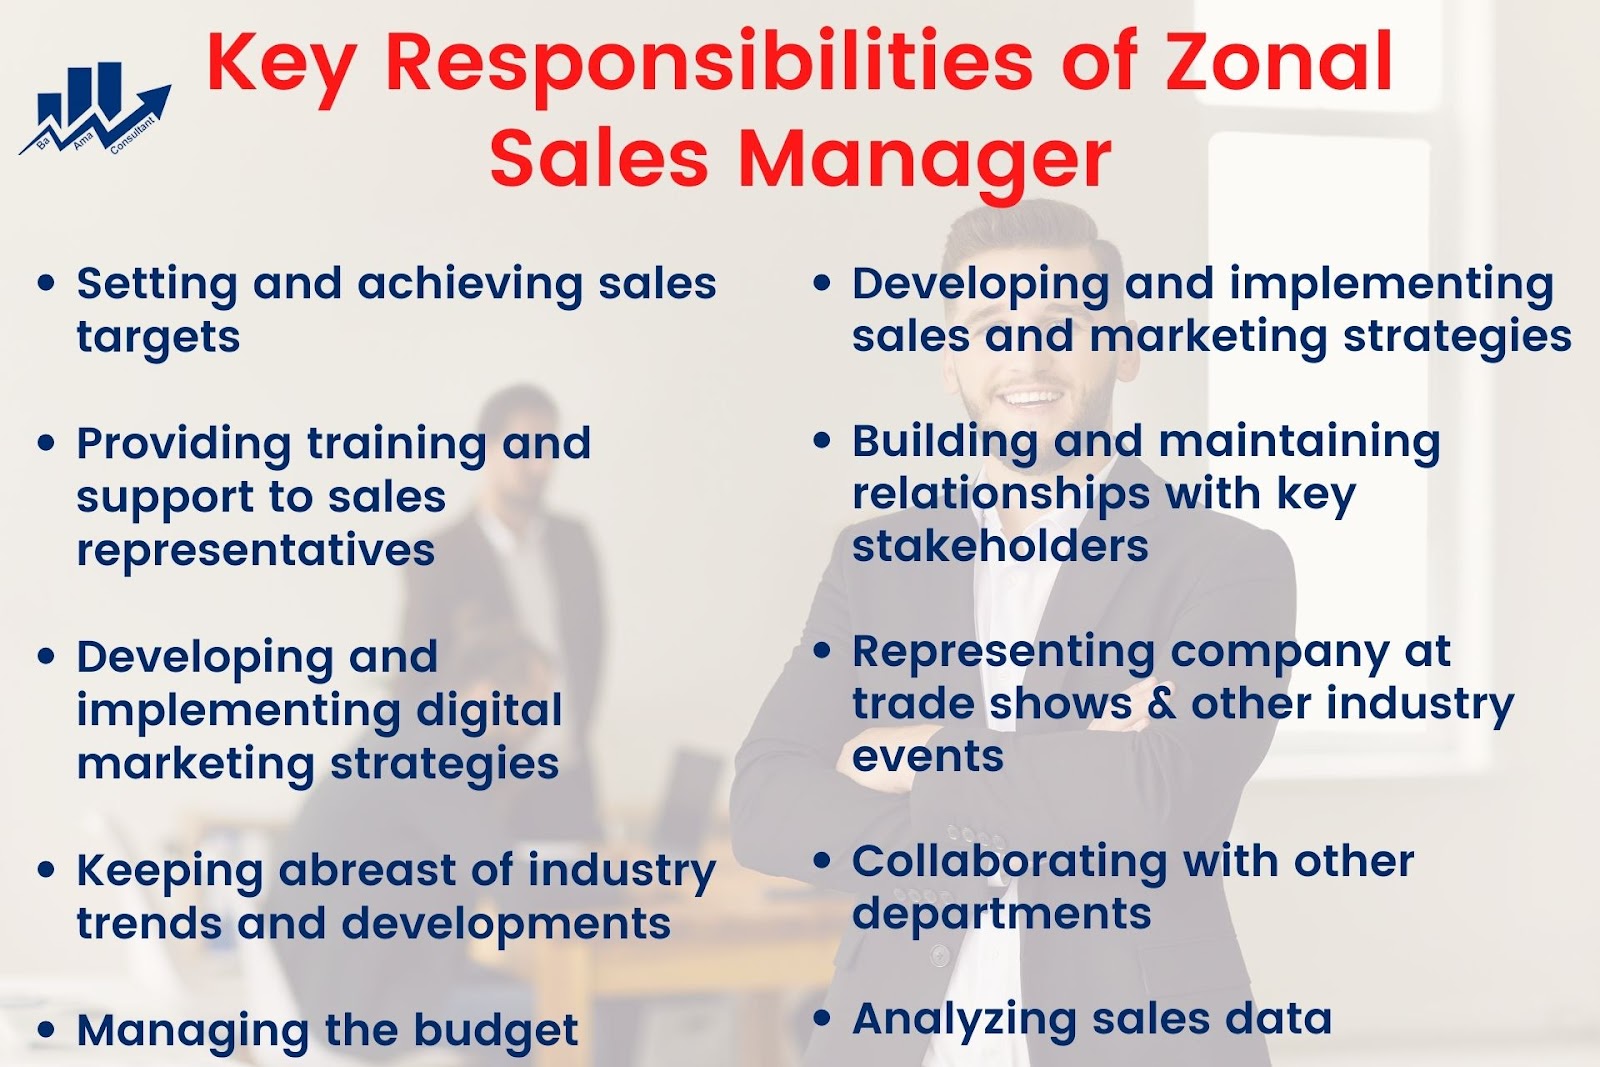 key responsibilities of zonal sales manager